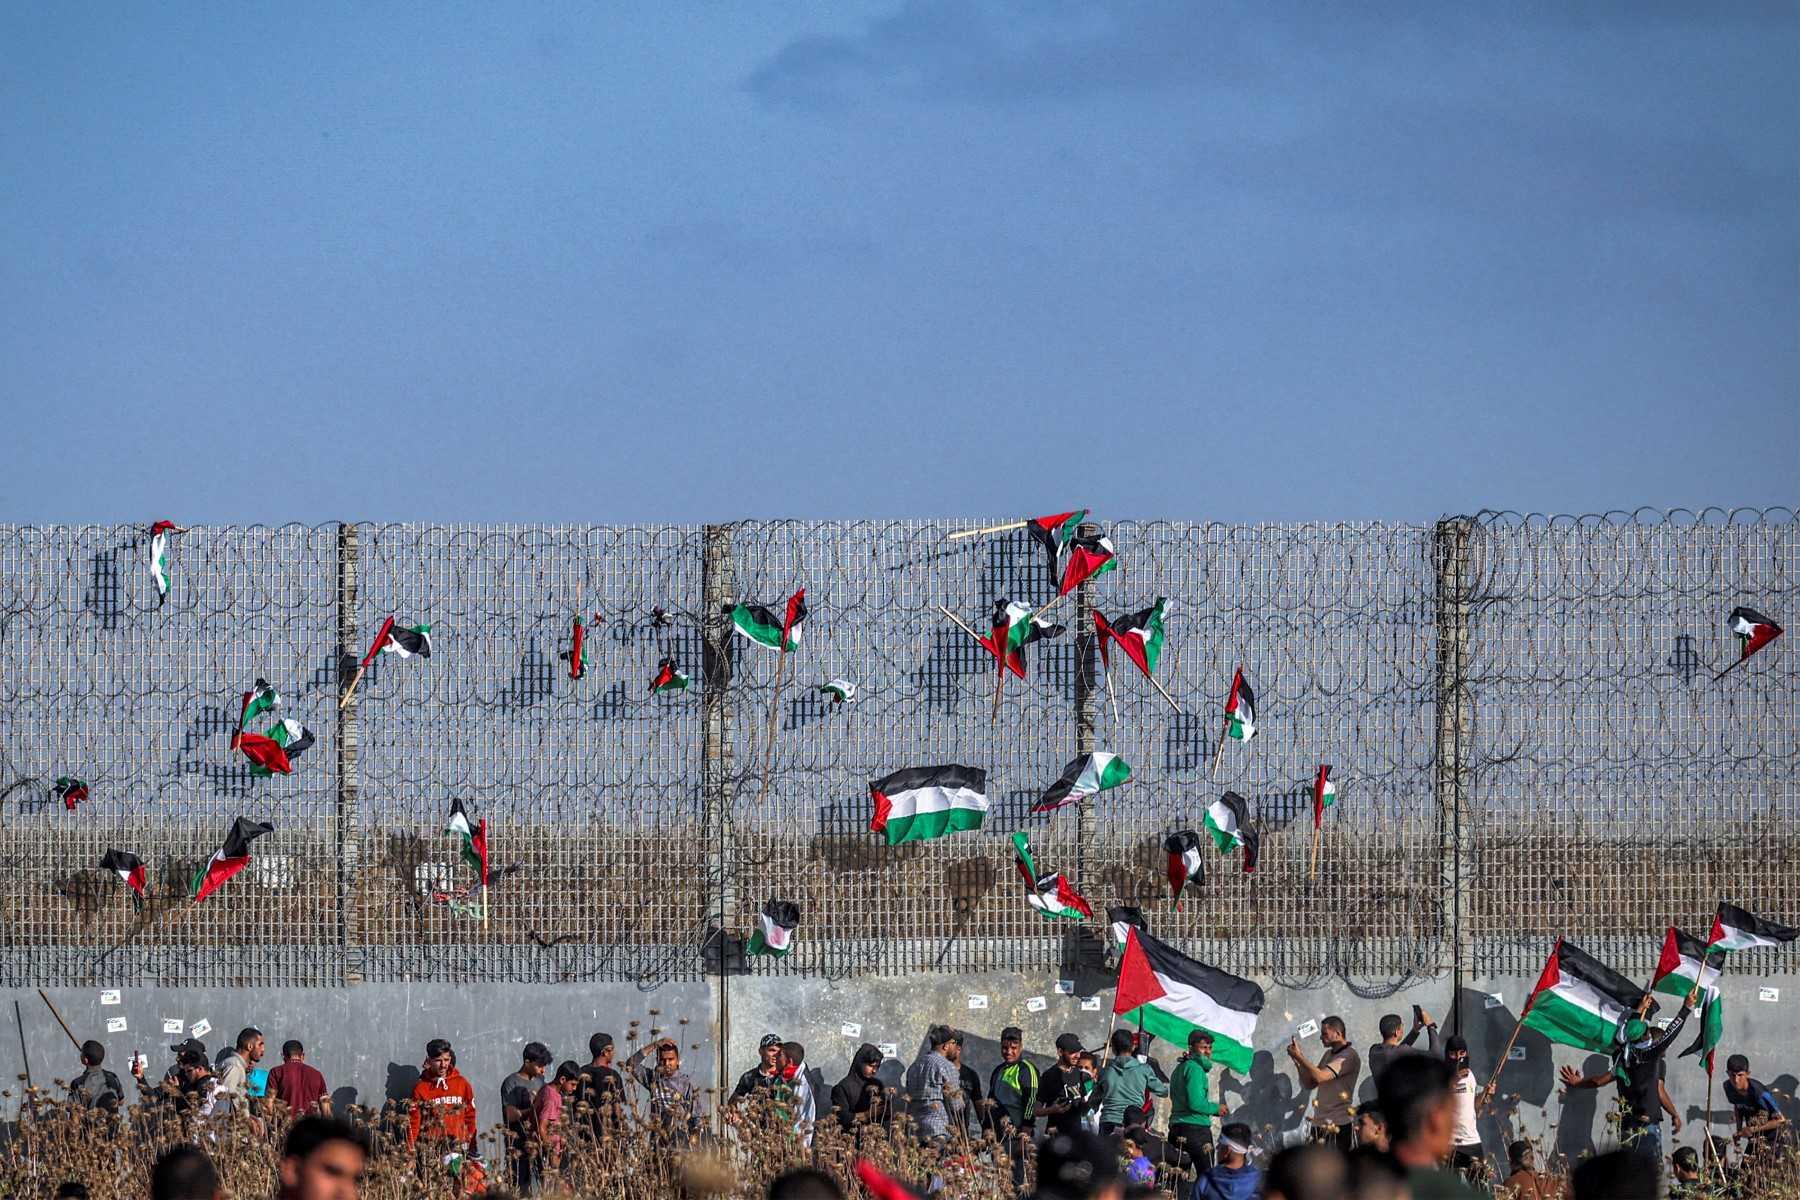 Palestinian flags are fixed to the barbed-wire fence during a 'flag march' demonstration along the border with Israel east of Gaza city on May 18, in response to the annual Israeli flag march marking 'Jerusalem Day' commemorating the old city's capture by Israel. Photo: AFP 